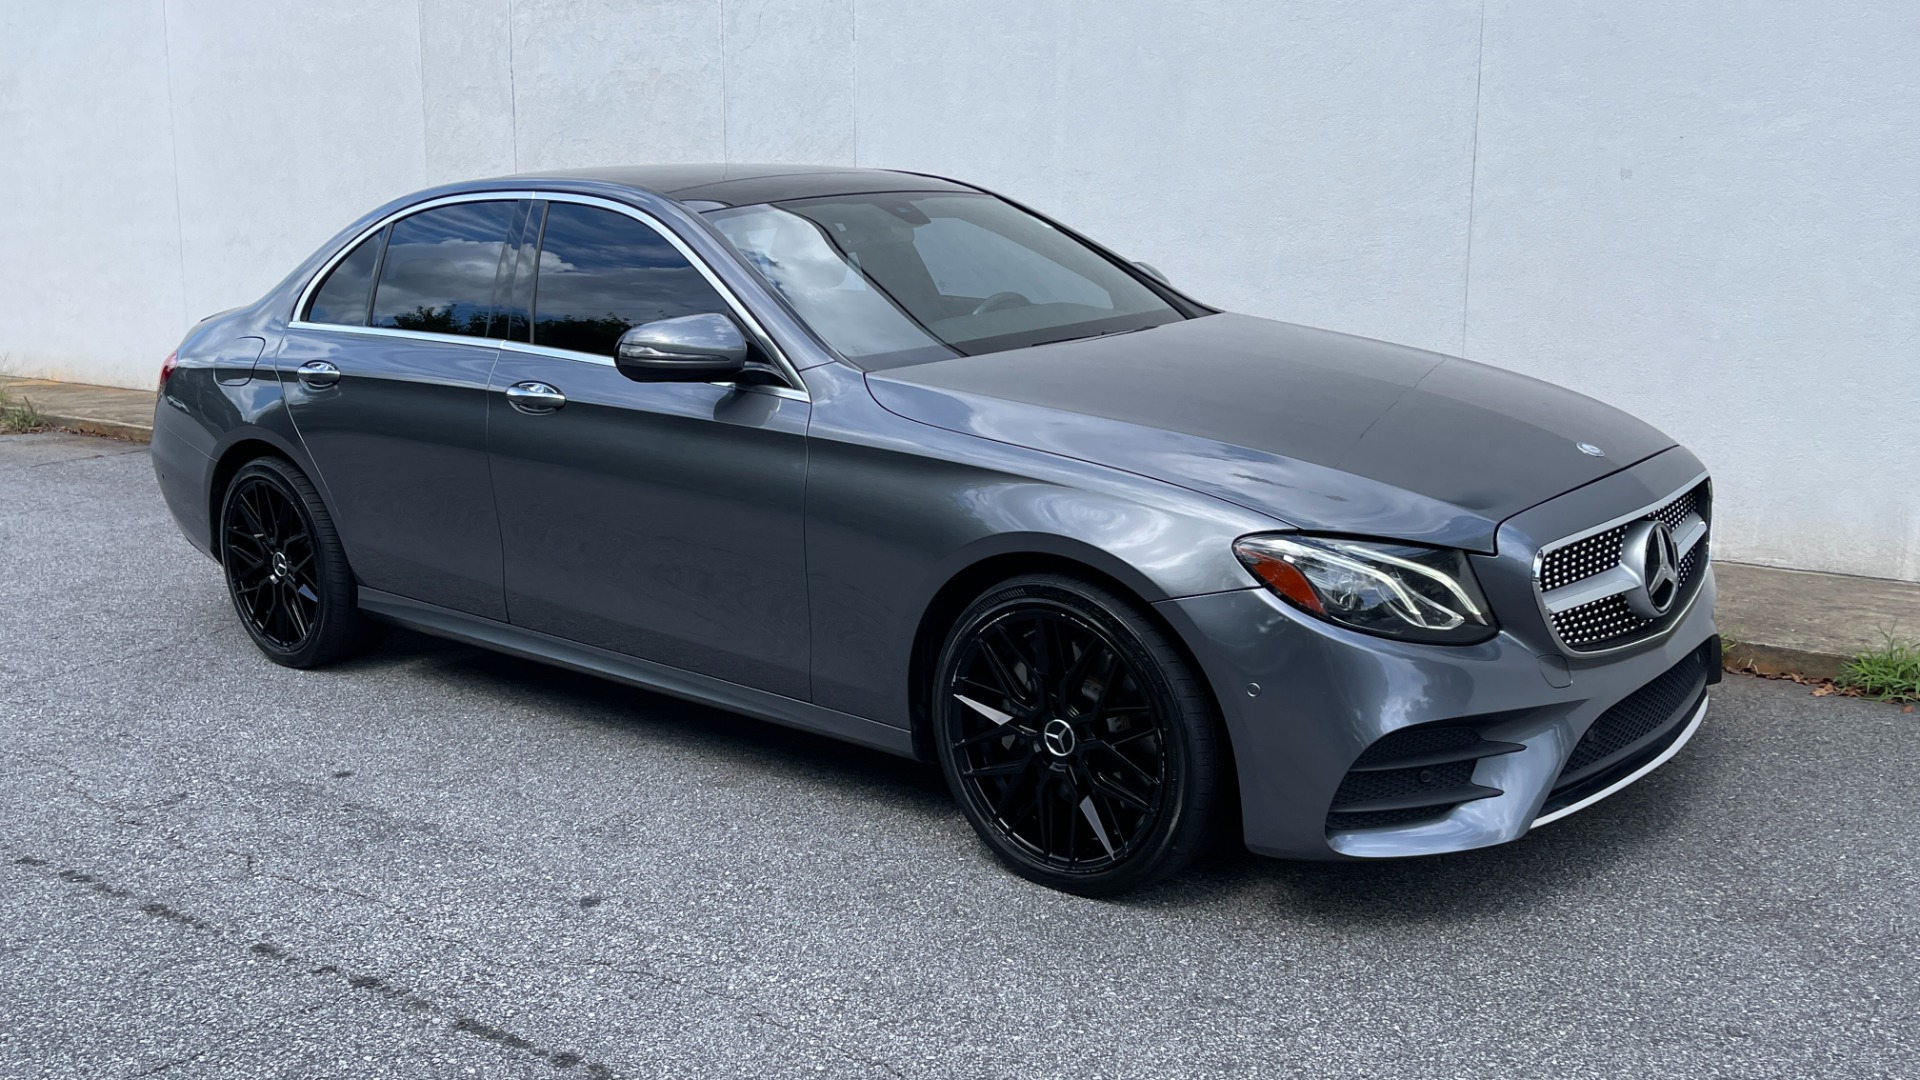 Used 2017 Mercedes-Benz E-Class E300 LUXURY / UPGRADED WHEELS / SPORT WHEEL / PREMIUM 1 / BURMESTER AUDIO for sale $29,995 at Formula Imports in Charlotte NC 28227 2